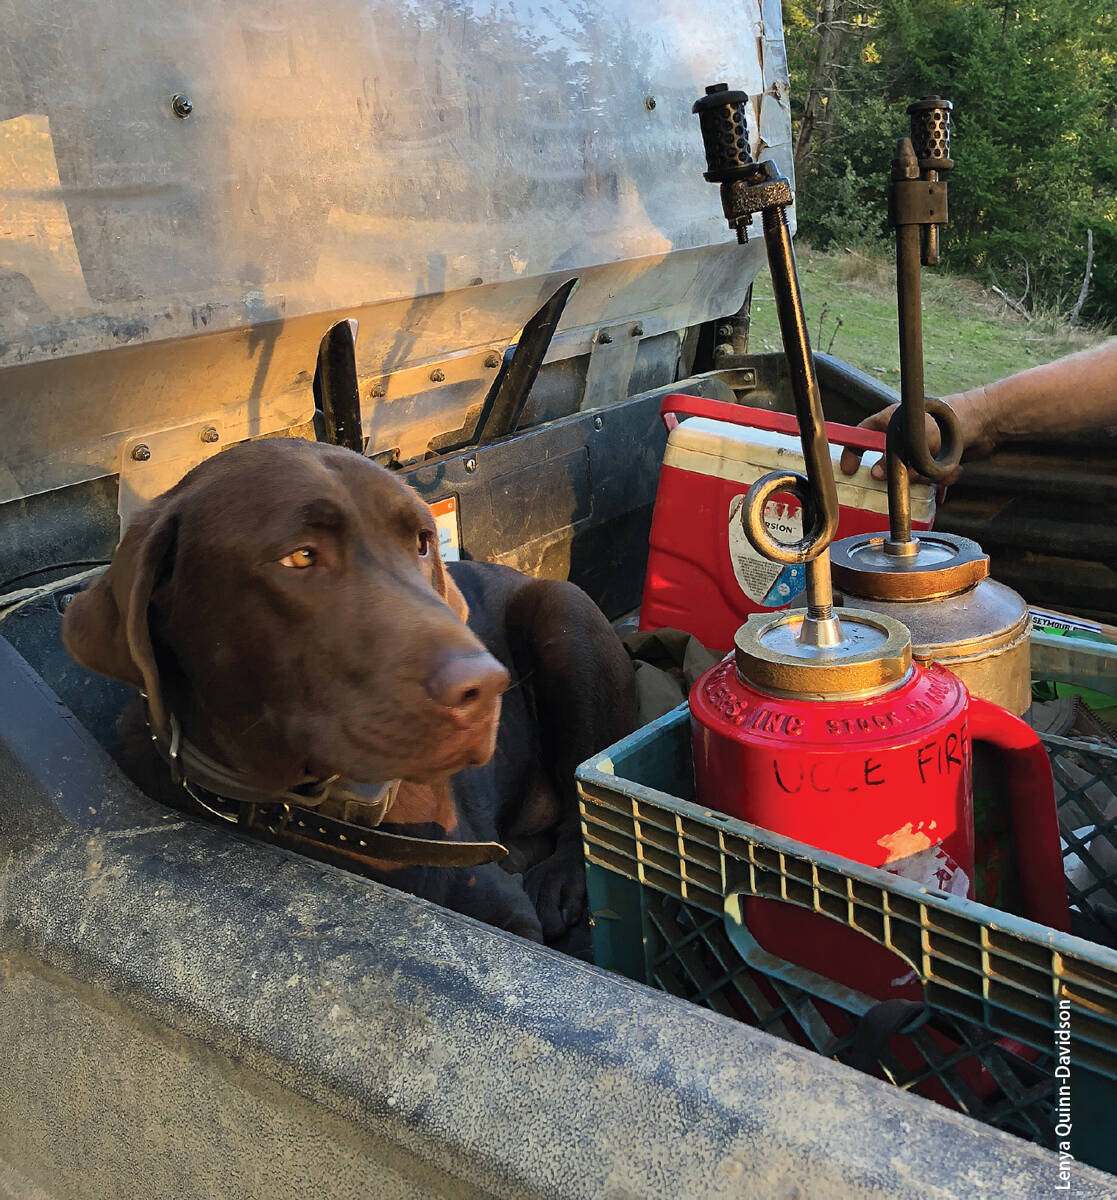 A dog protects drip torches in the back of a truck. With prescribed fire, land managers can achieve objectives that range from reducing fuel loads in forests to establishing diverse ecosystems in which threatened species can thrive.